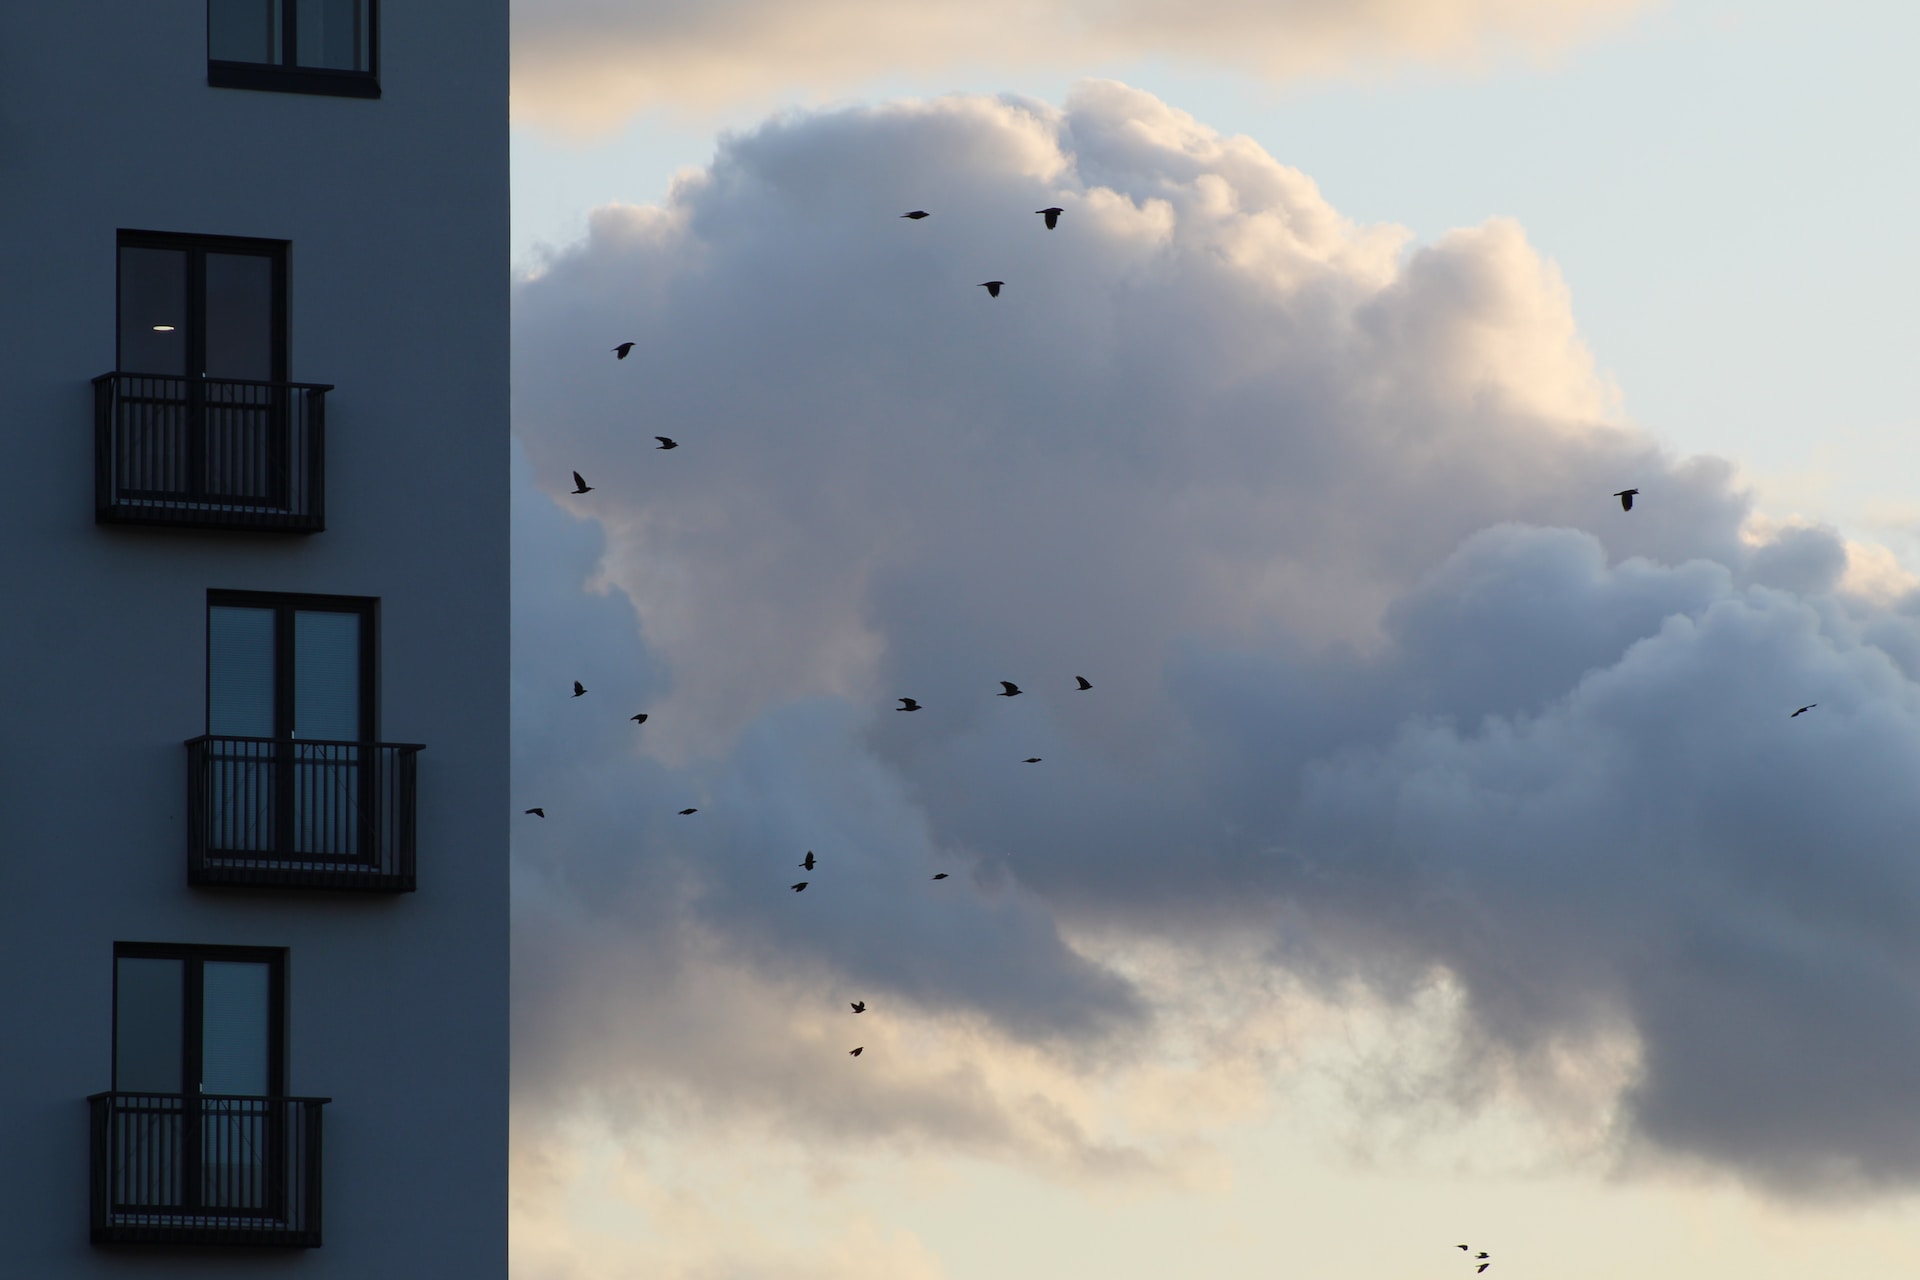 birds flying past a block of flats